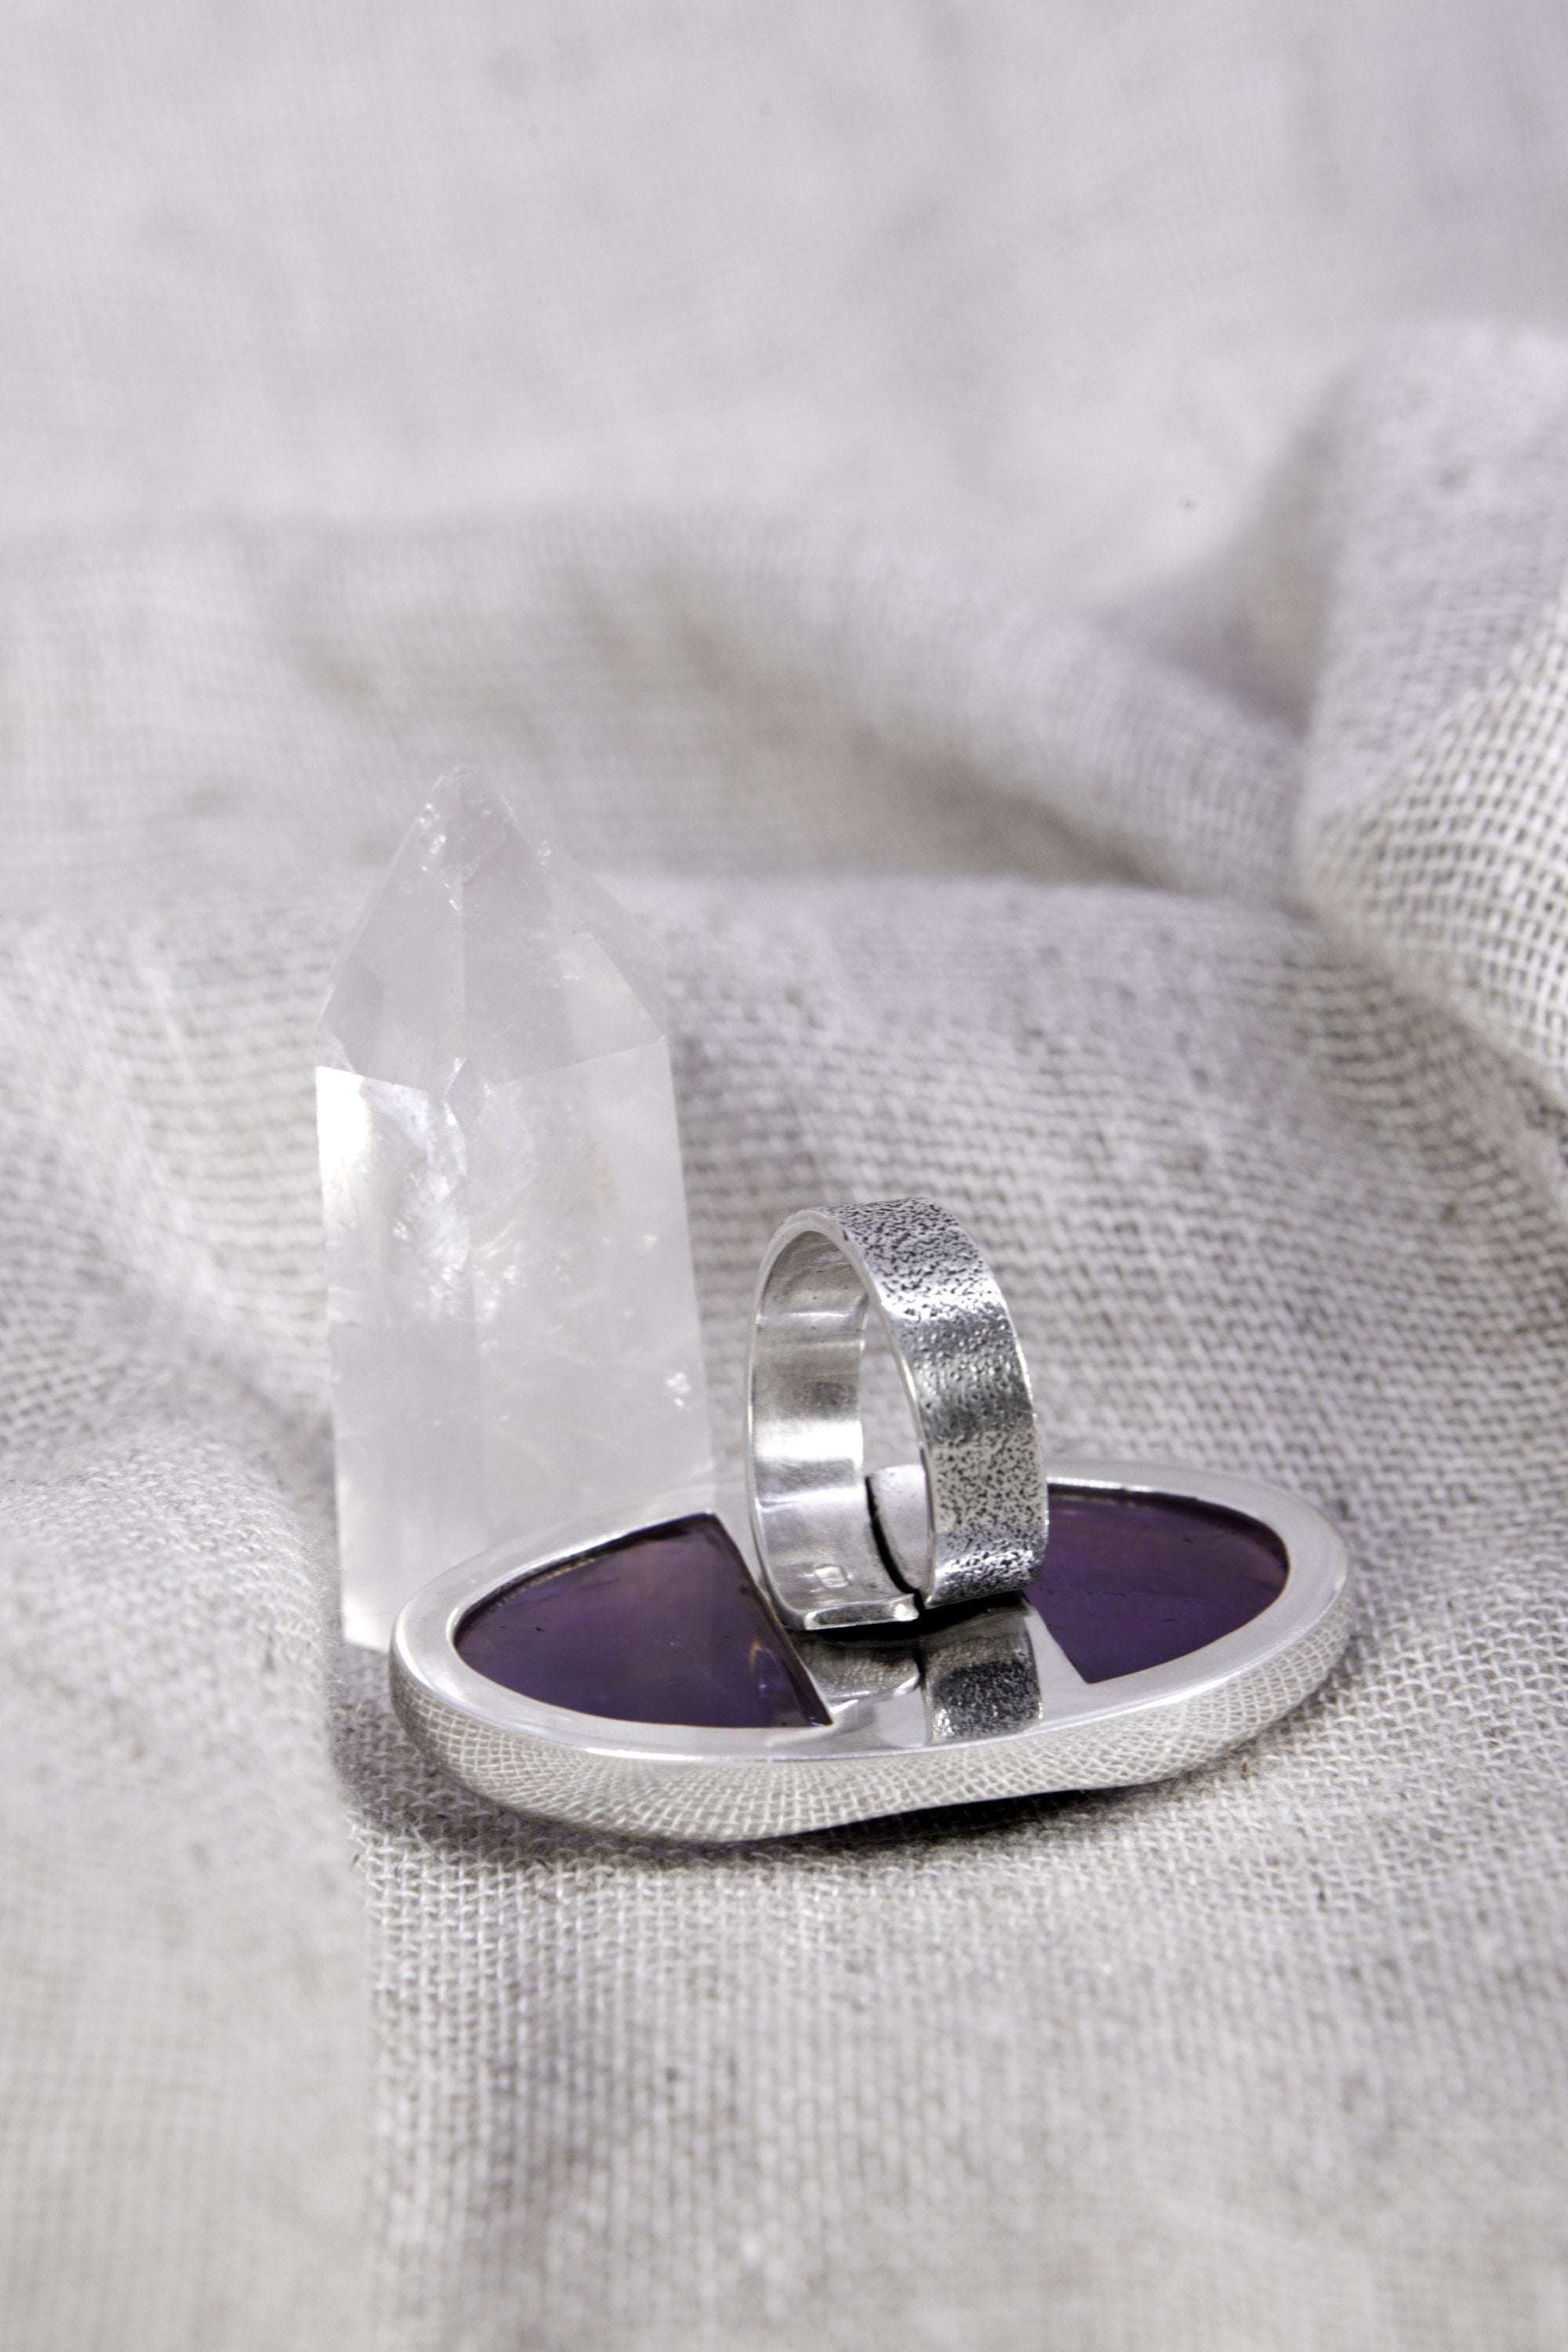 A Sturdy Veil of Elegance and Mystique: Adjustable Sterling Silver Ring with Amethyst Oval - Unisex - Size 5-12 US - NO/02